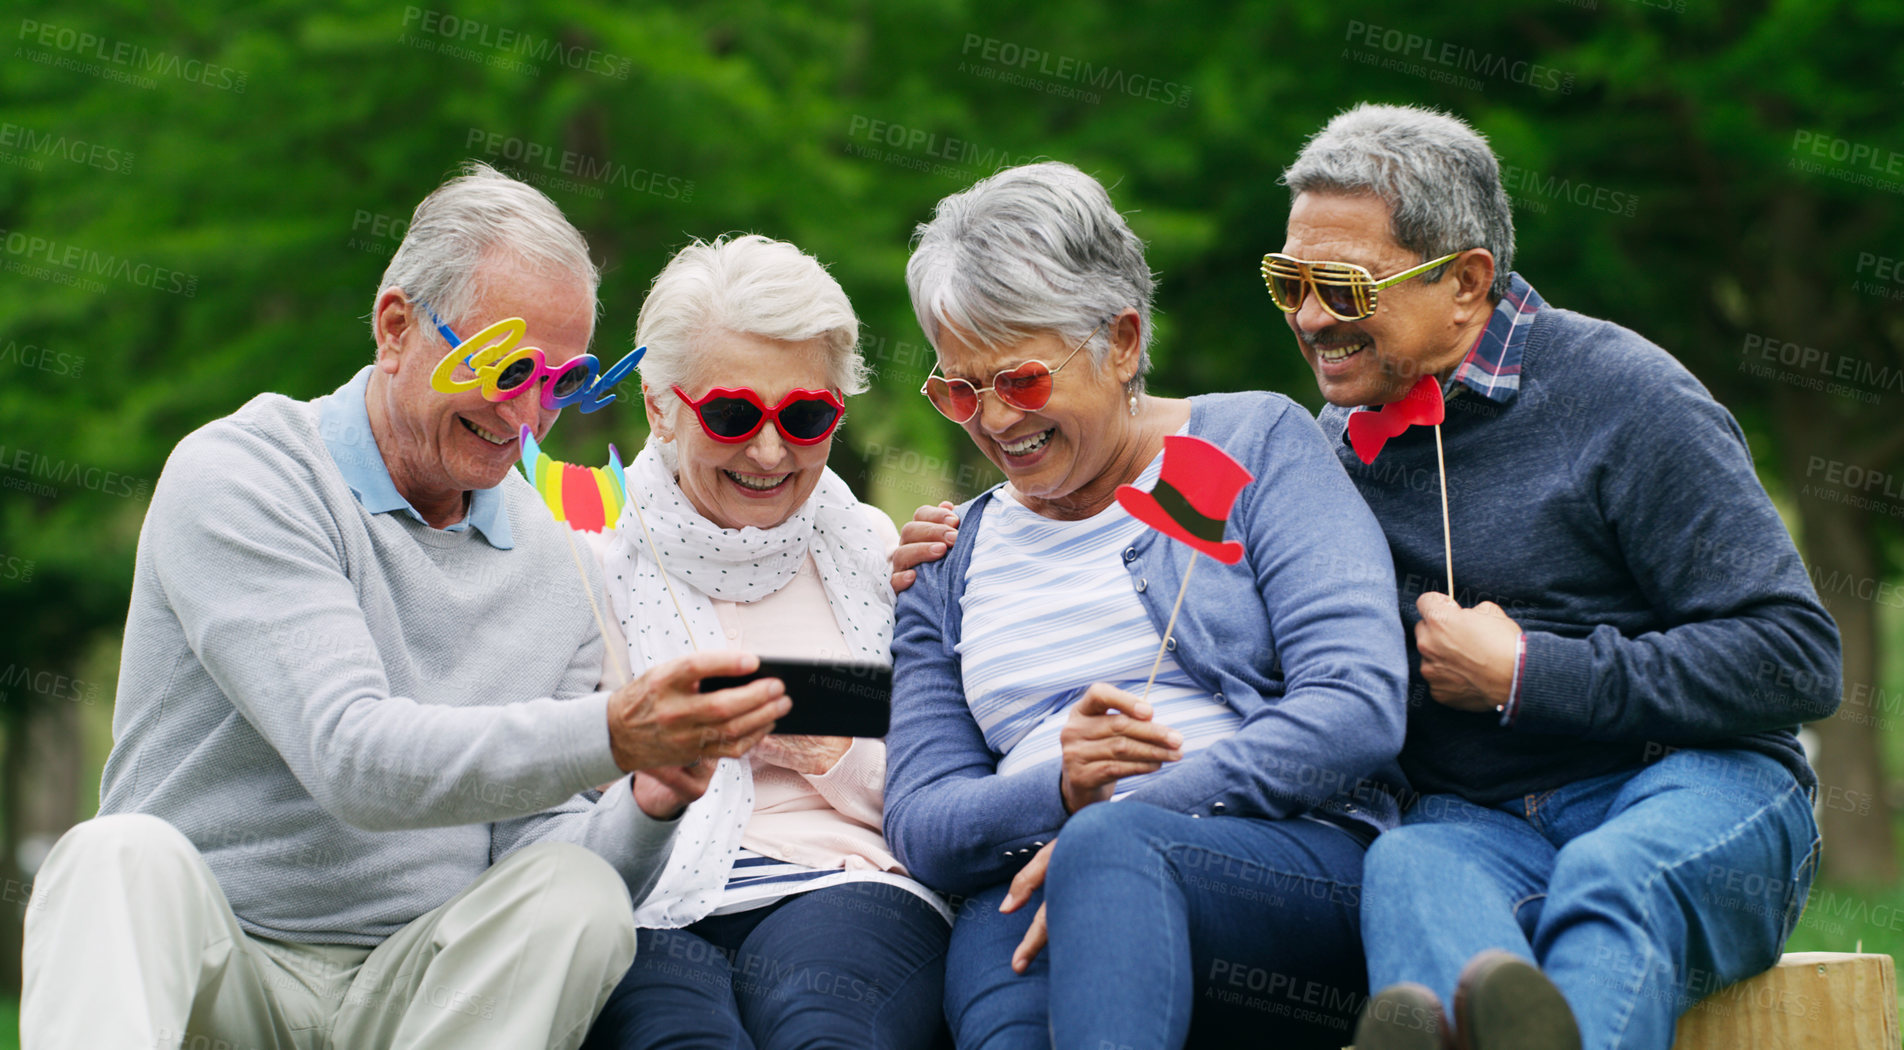 Buy stock photo Shot of a group of happy senior men and women taking selfies while wearing fun glasses at the park